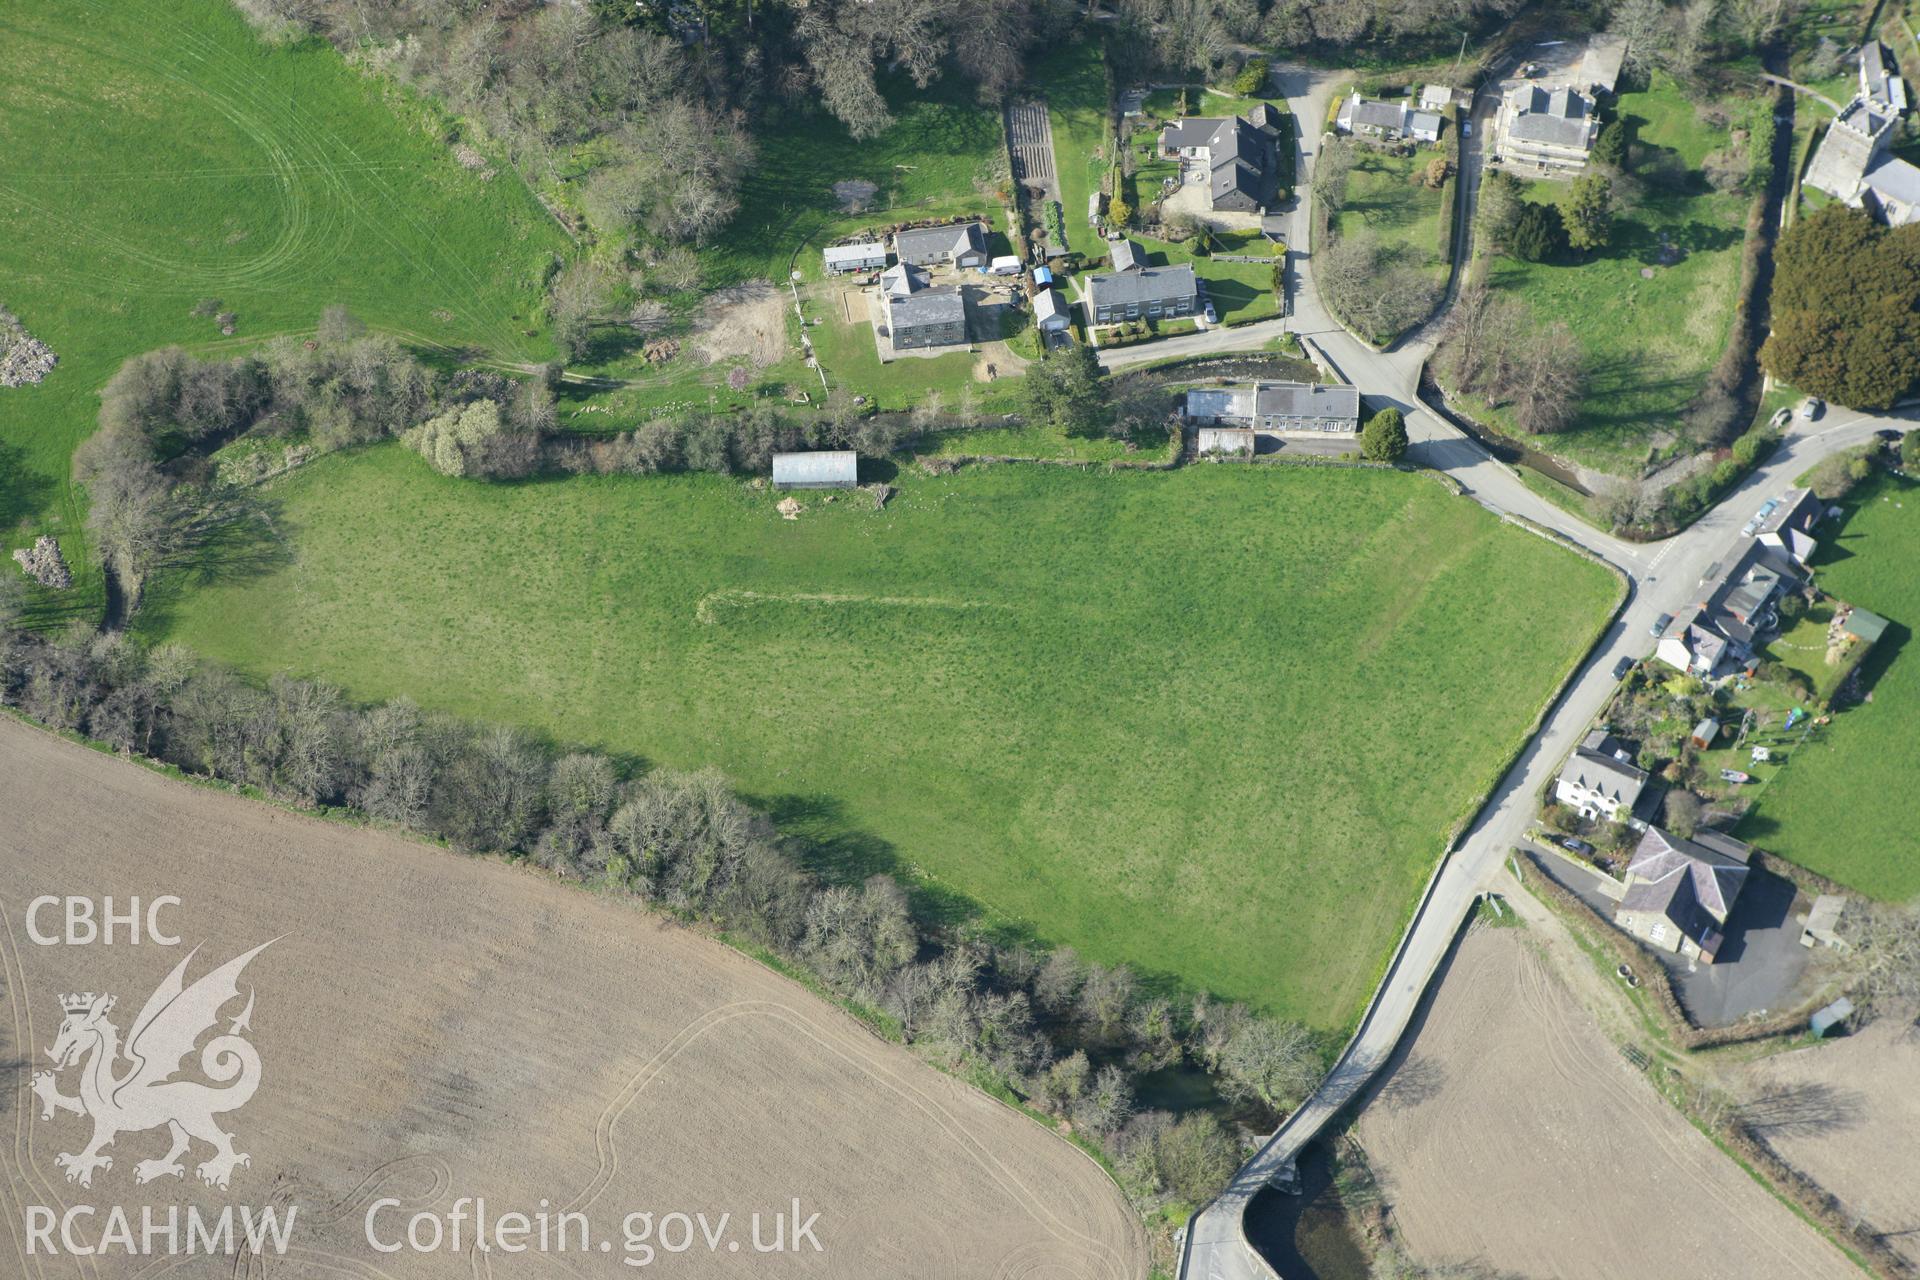 RCAHMW colour oblique aerial photograph of earthworks at Pwll-y-Botel, Nevern. Taken on 13 April 2010 by Toby Driver